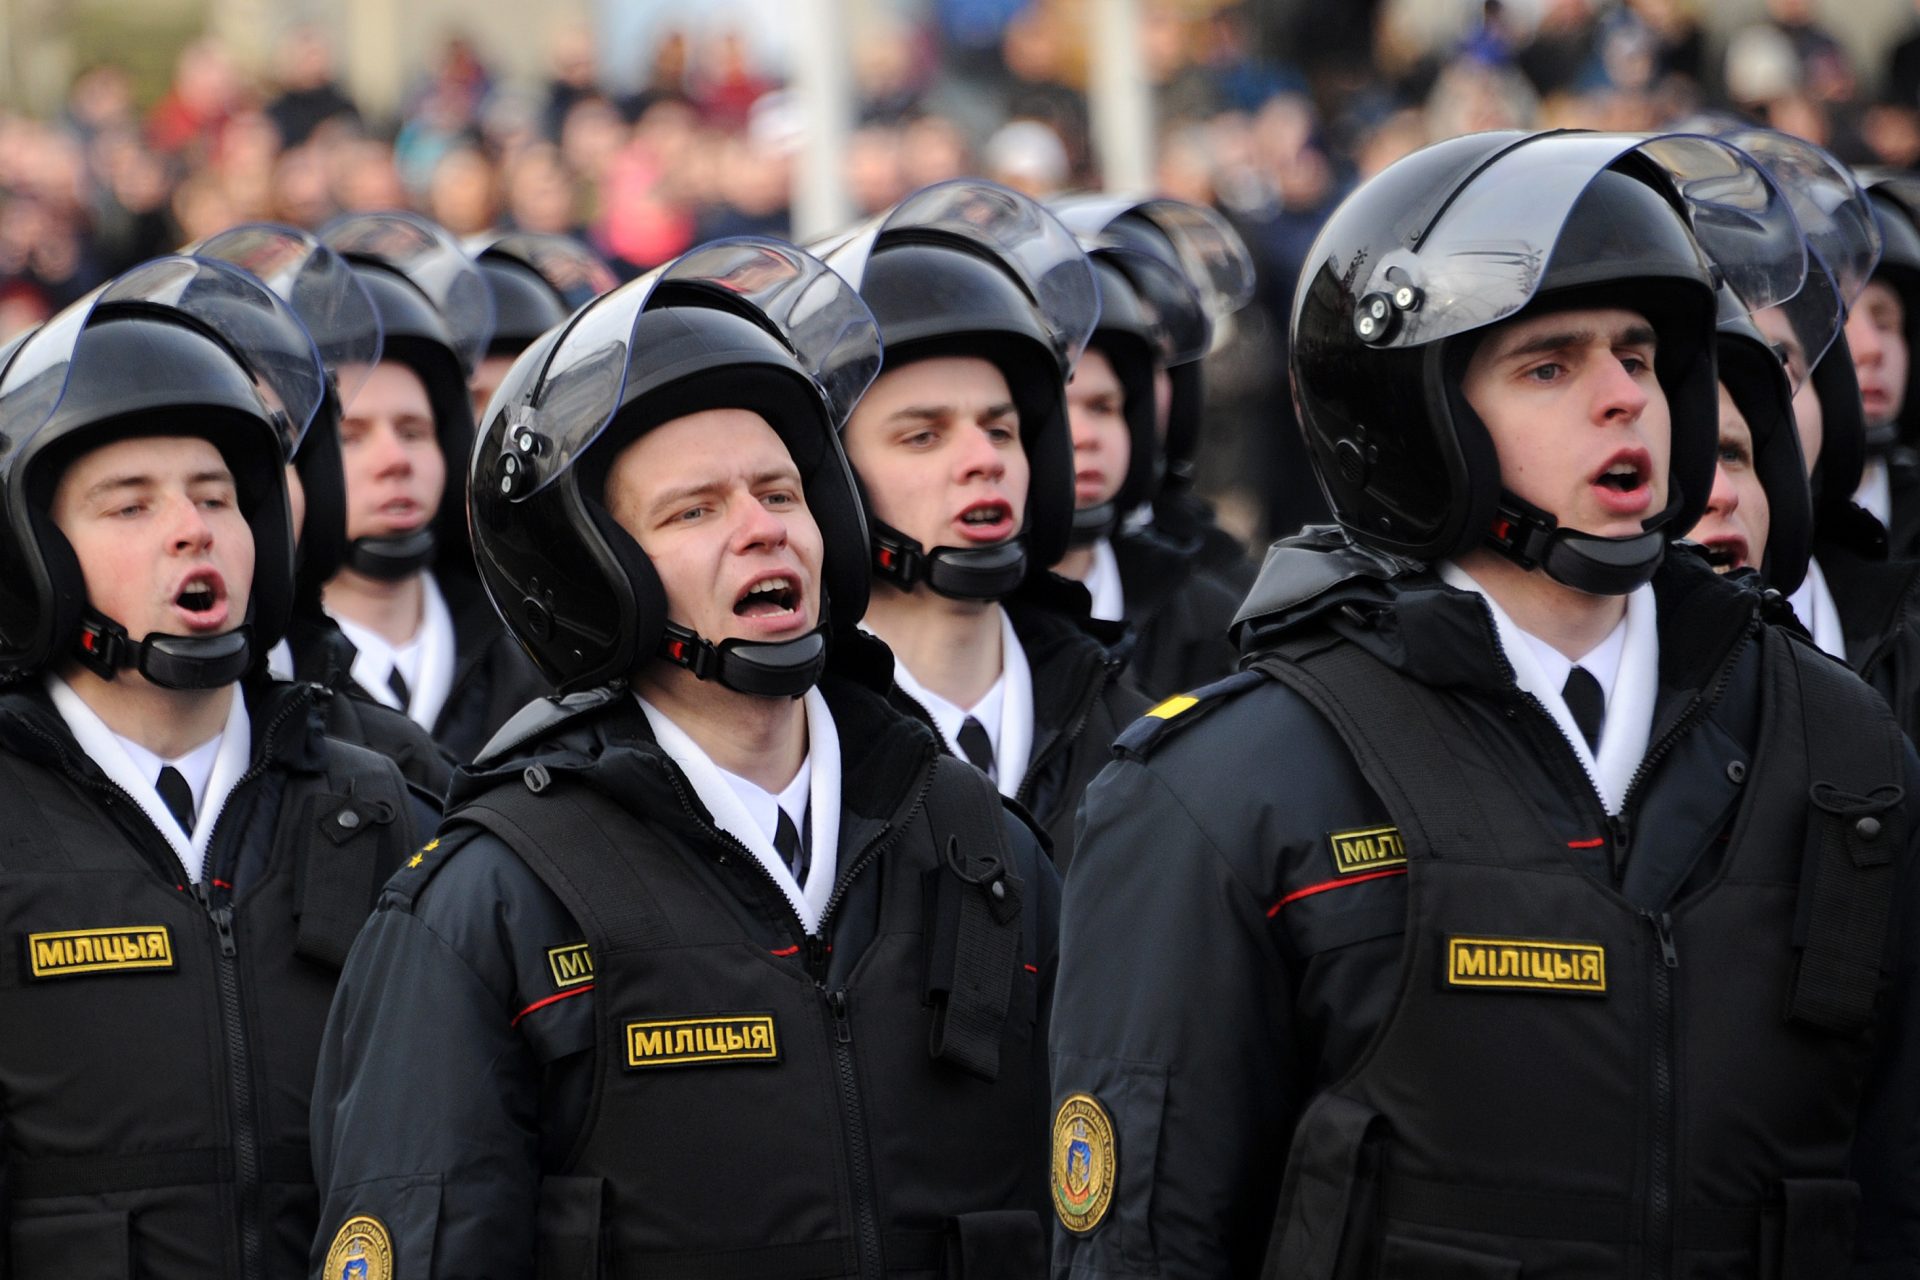 The Association of Security Forces of Belarus